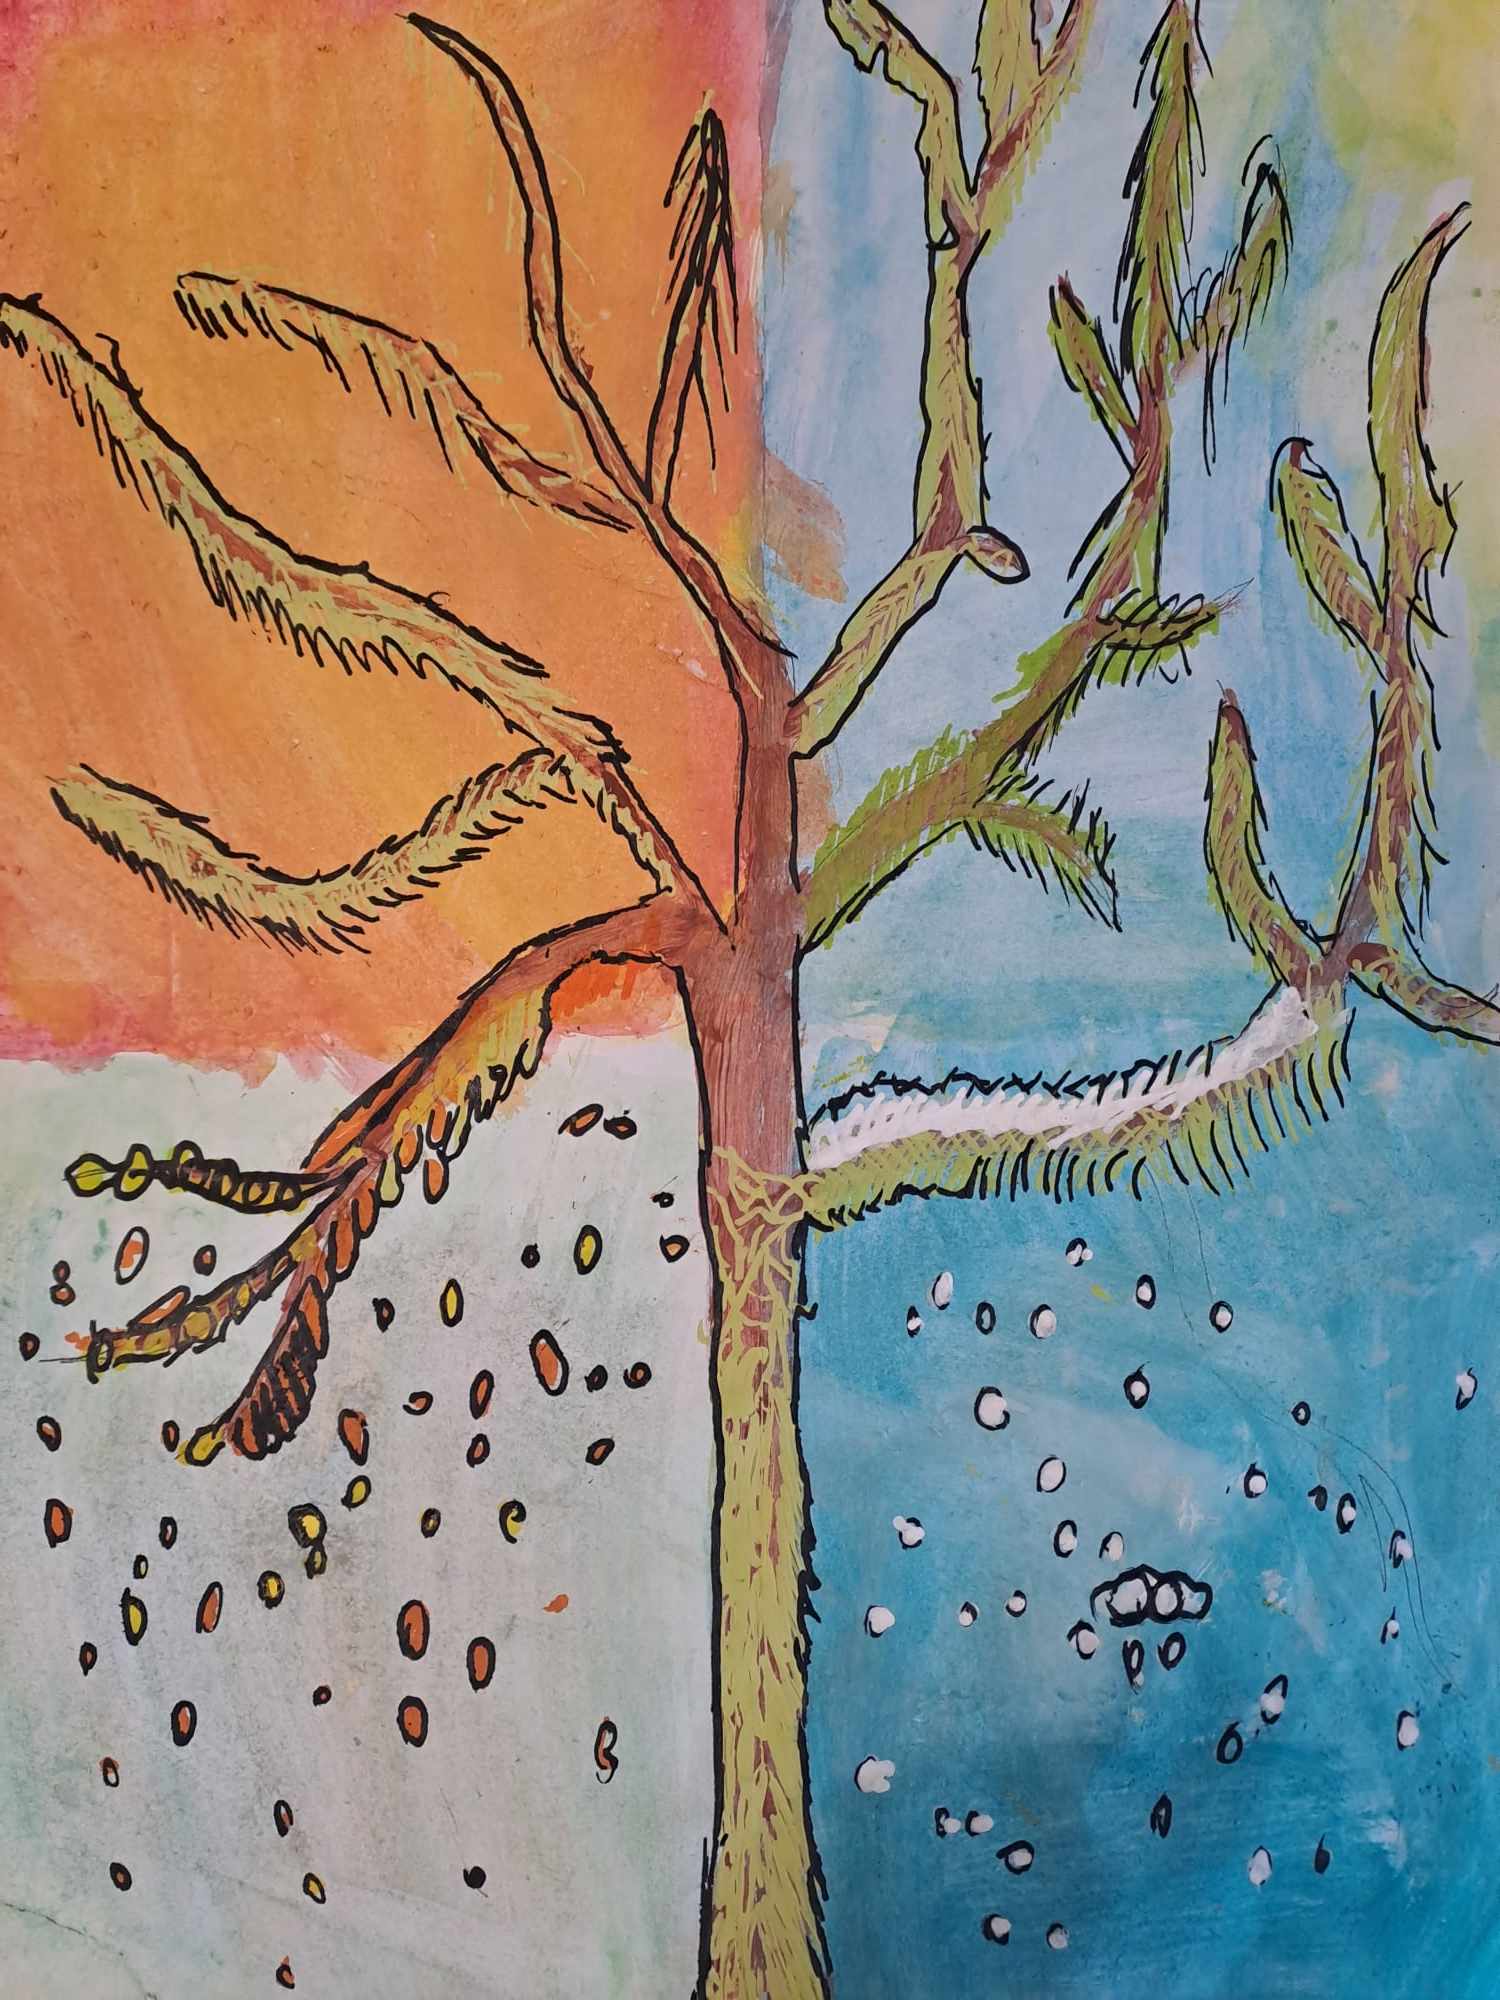 Student painting of a tree divided into 4 segments showing the four seasons from summer with lush foliage, autumn as leaves fall, winter as snow covers and spring as new growth appears. Created using watercolour, posca pens and textas